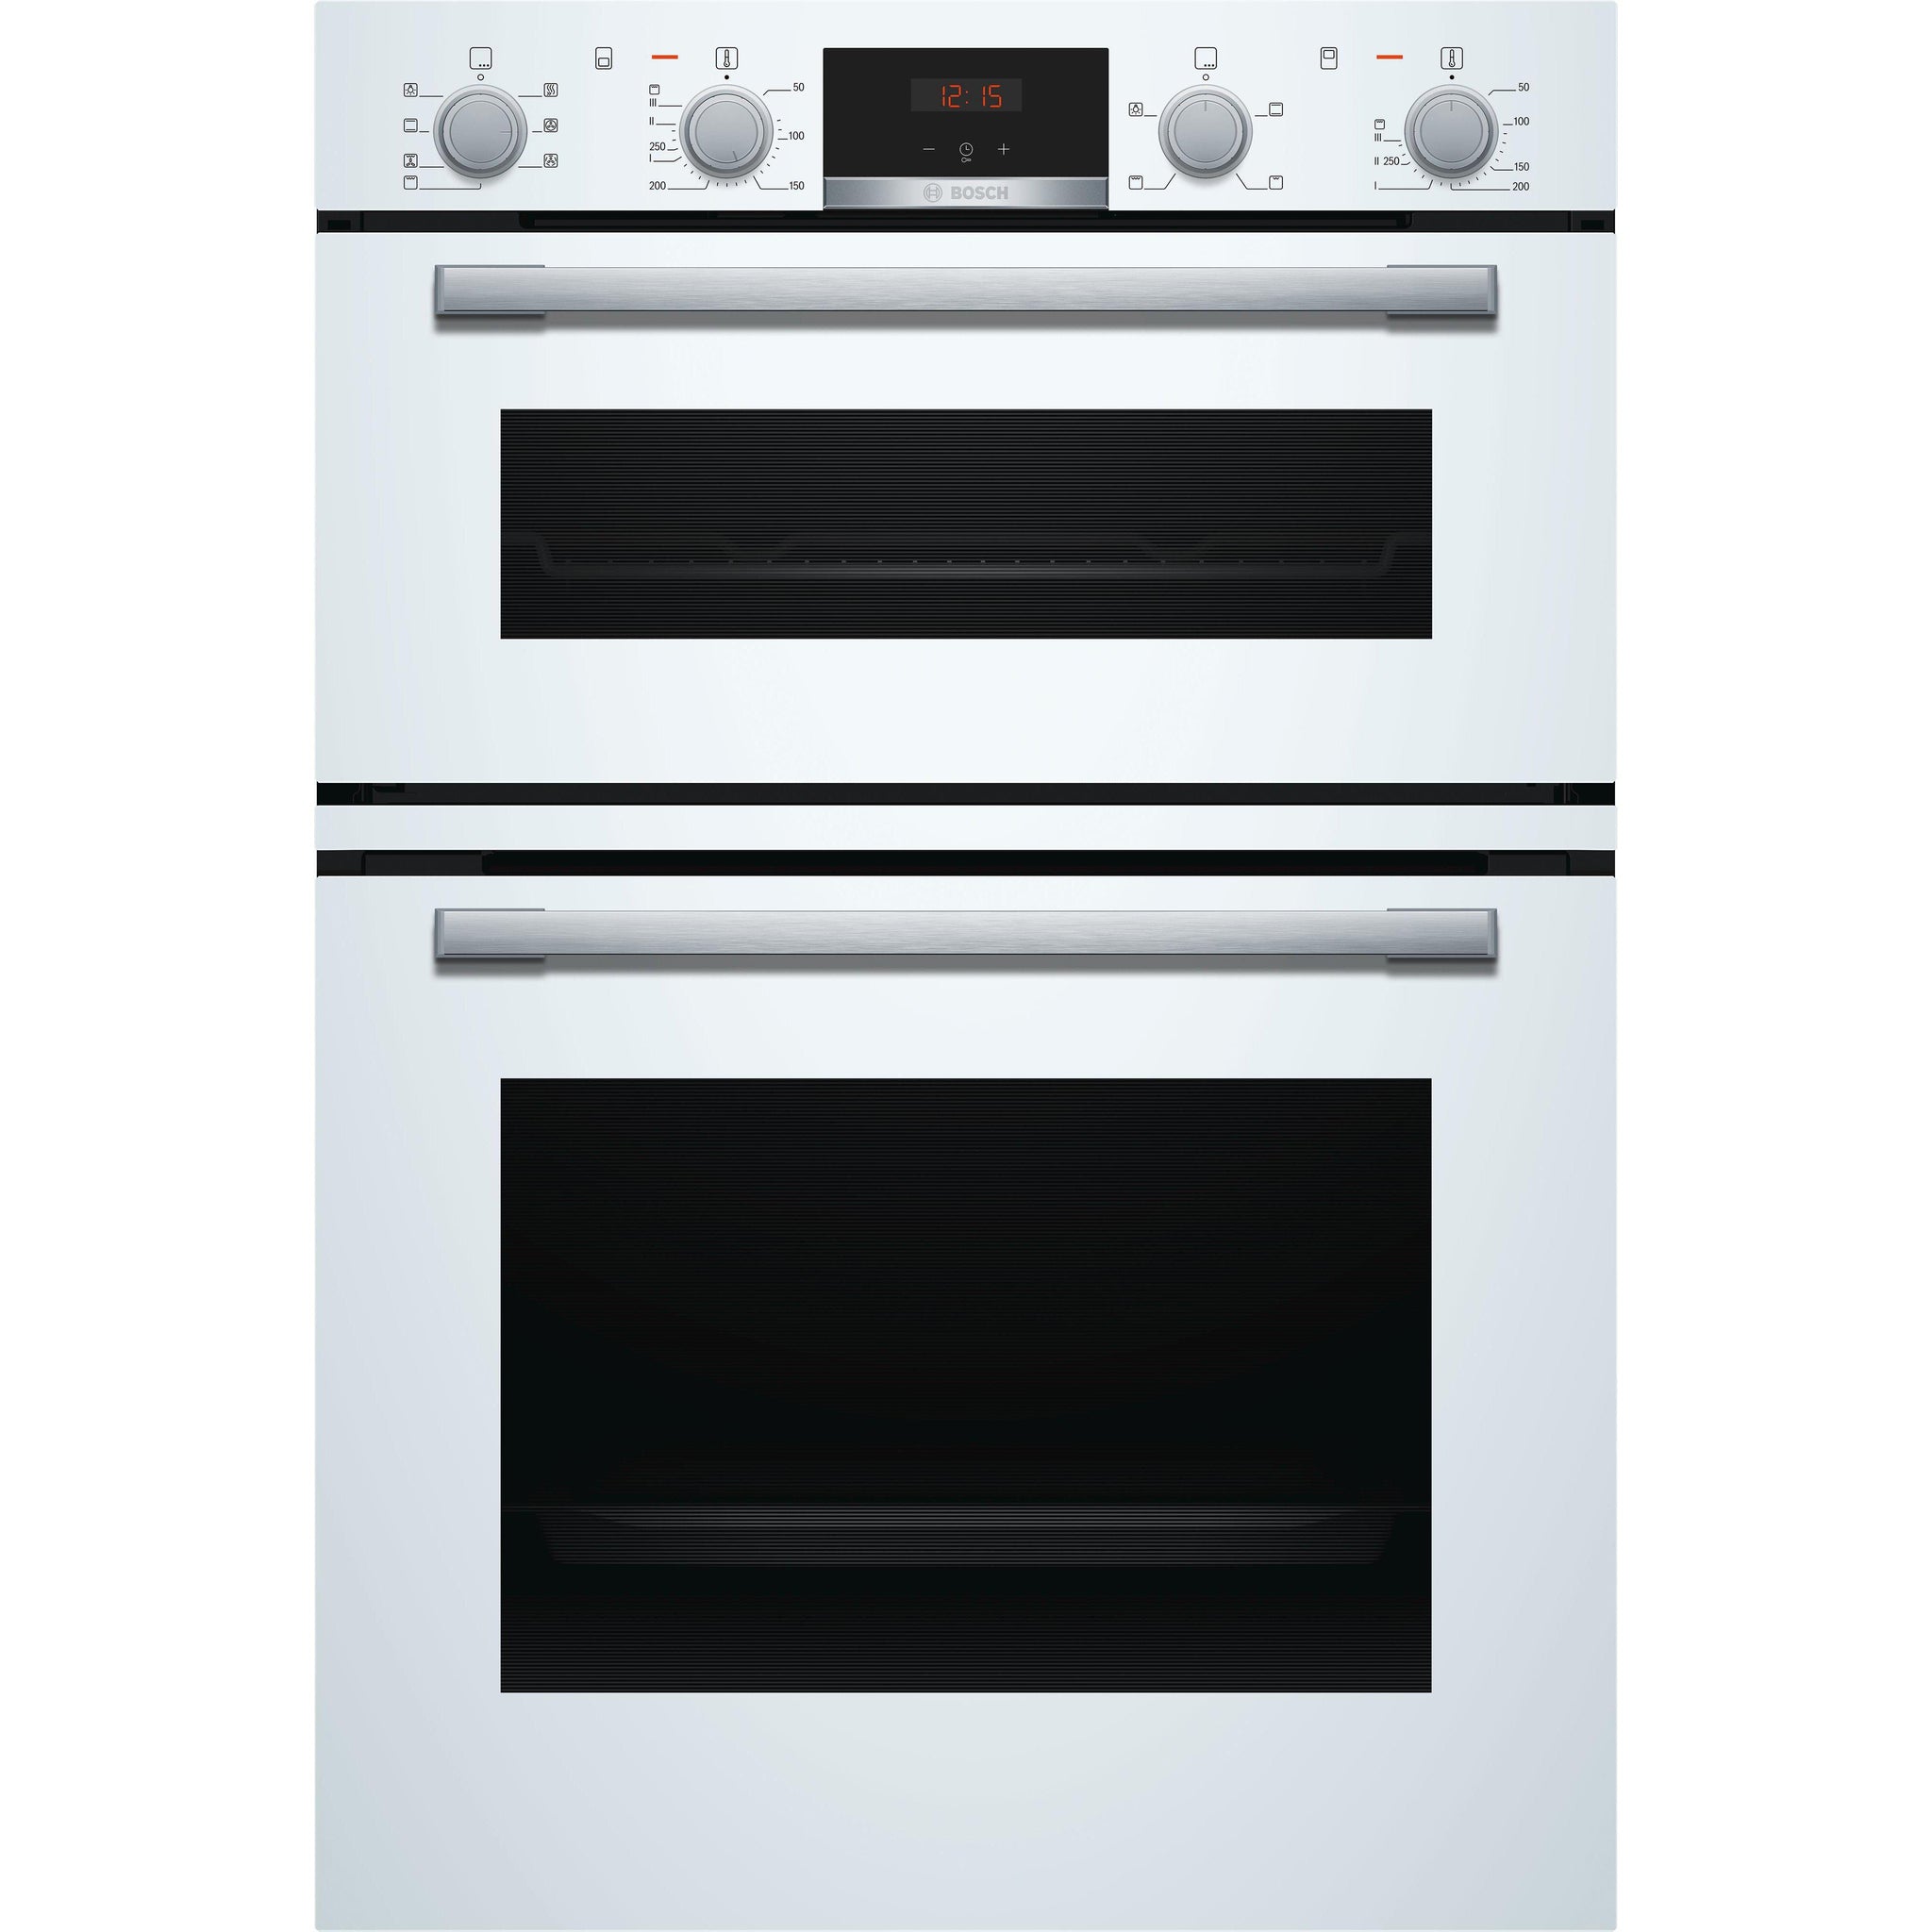 Bosch Series 4 Mbs533bw0b Builtin Double Oven White Delivery Within 710 Days